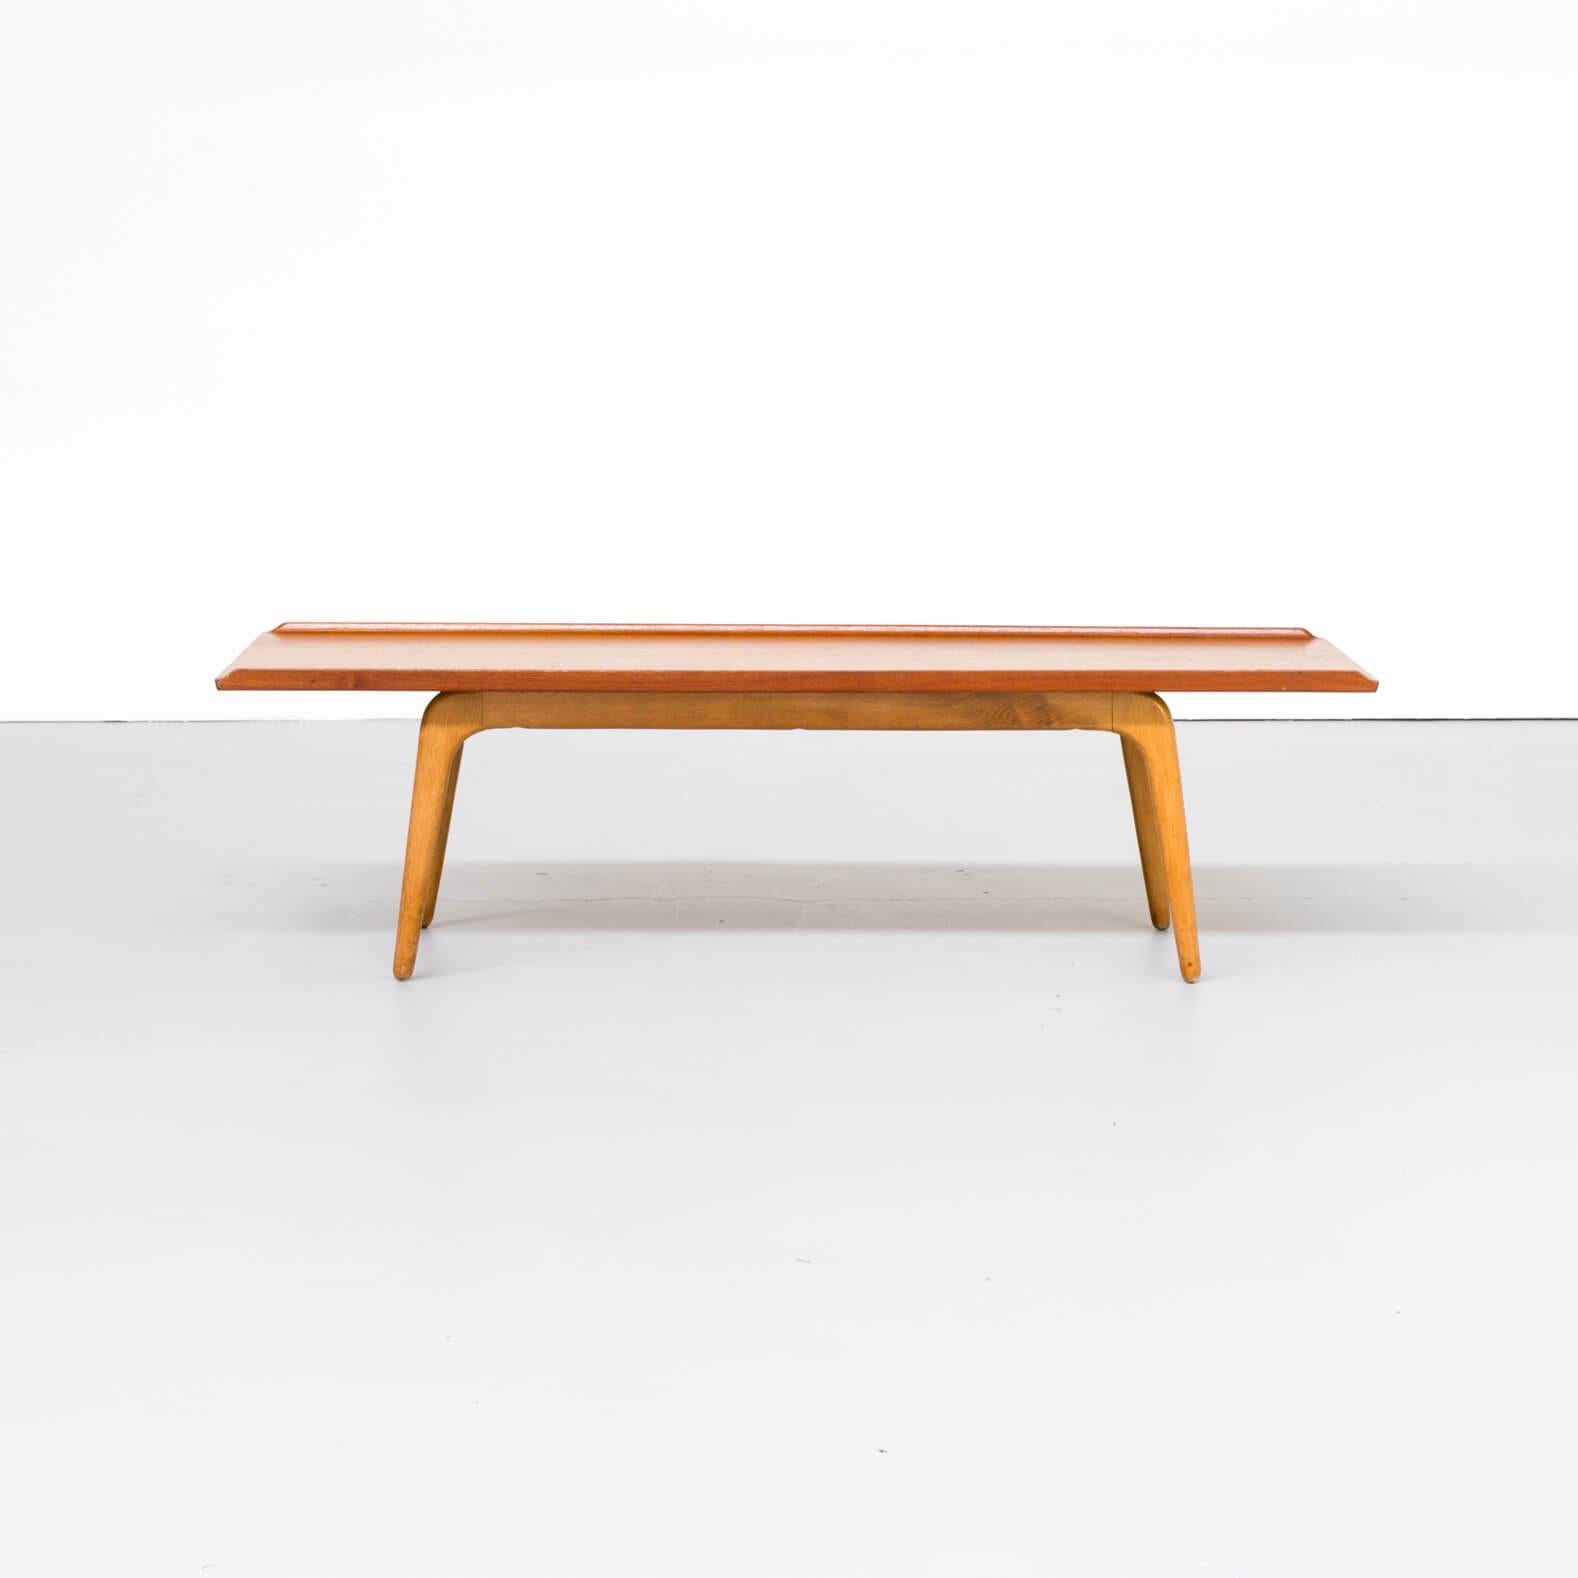 Danish designer-cabinetmaker Aksel Bender Madsen (1916-2000) created a number of classic midcentury designs in the late 1940s, 1950s, and 1960s, often working jointly with his business partner and friend Ejner Larsen (1917-1987).
This well known